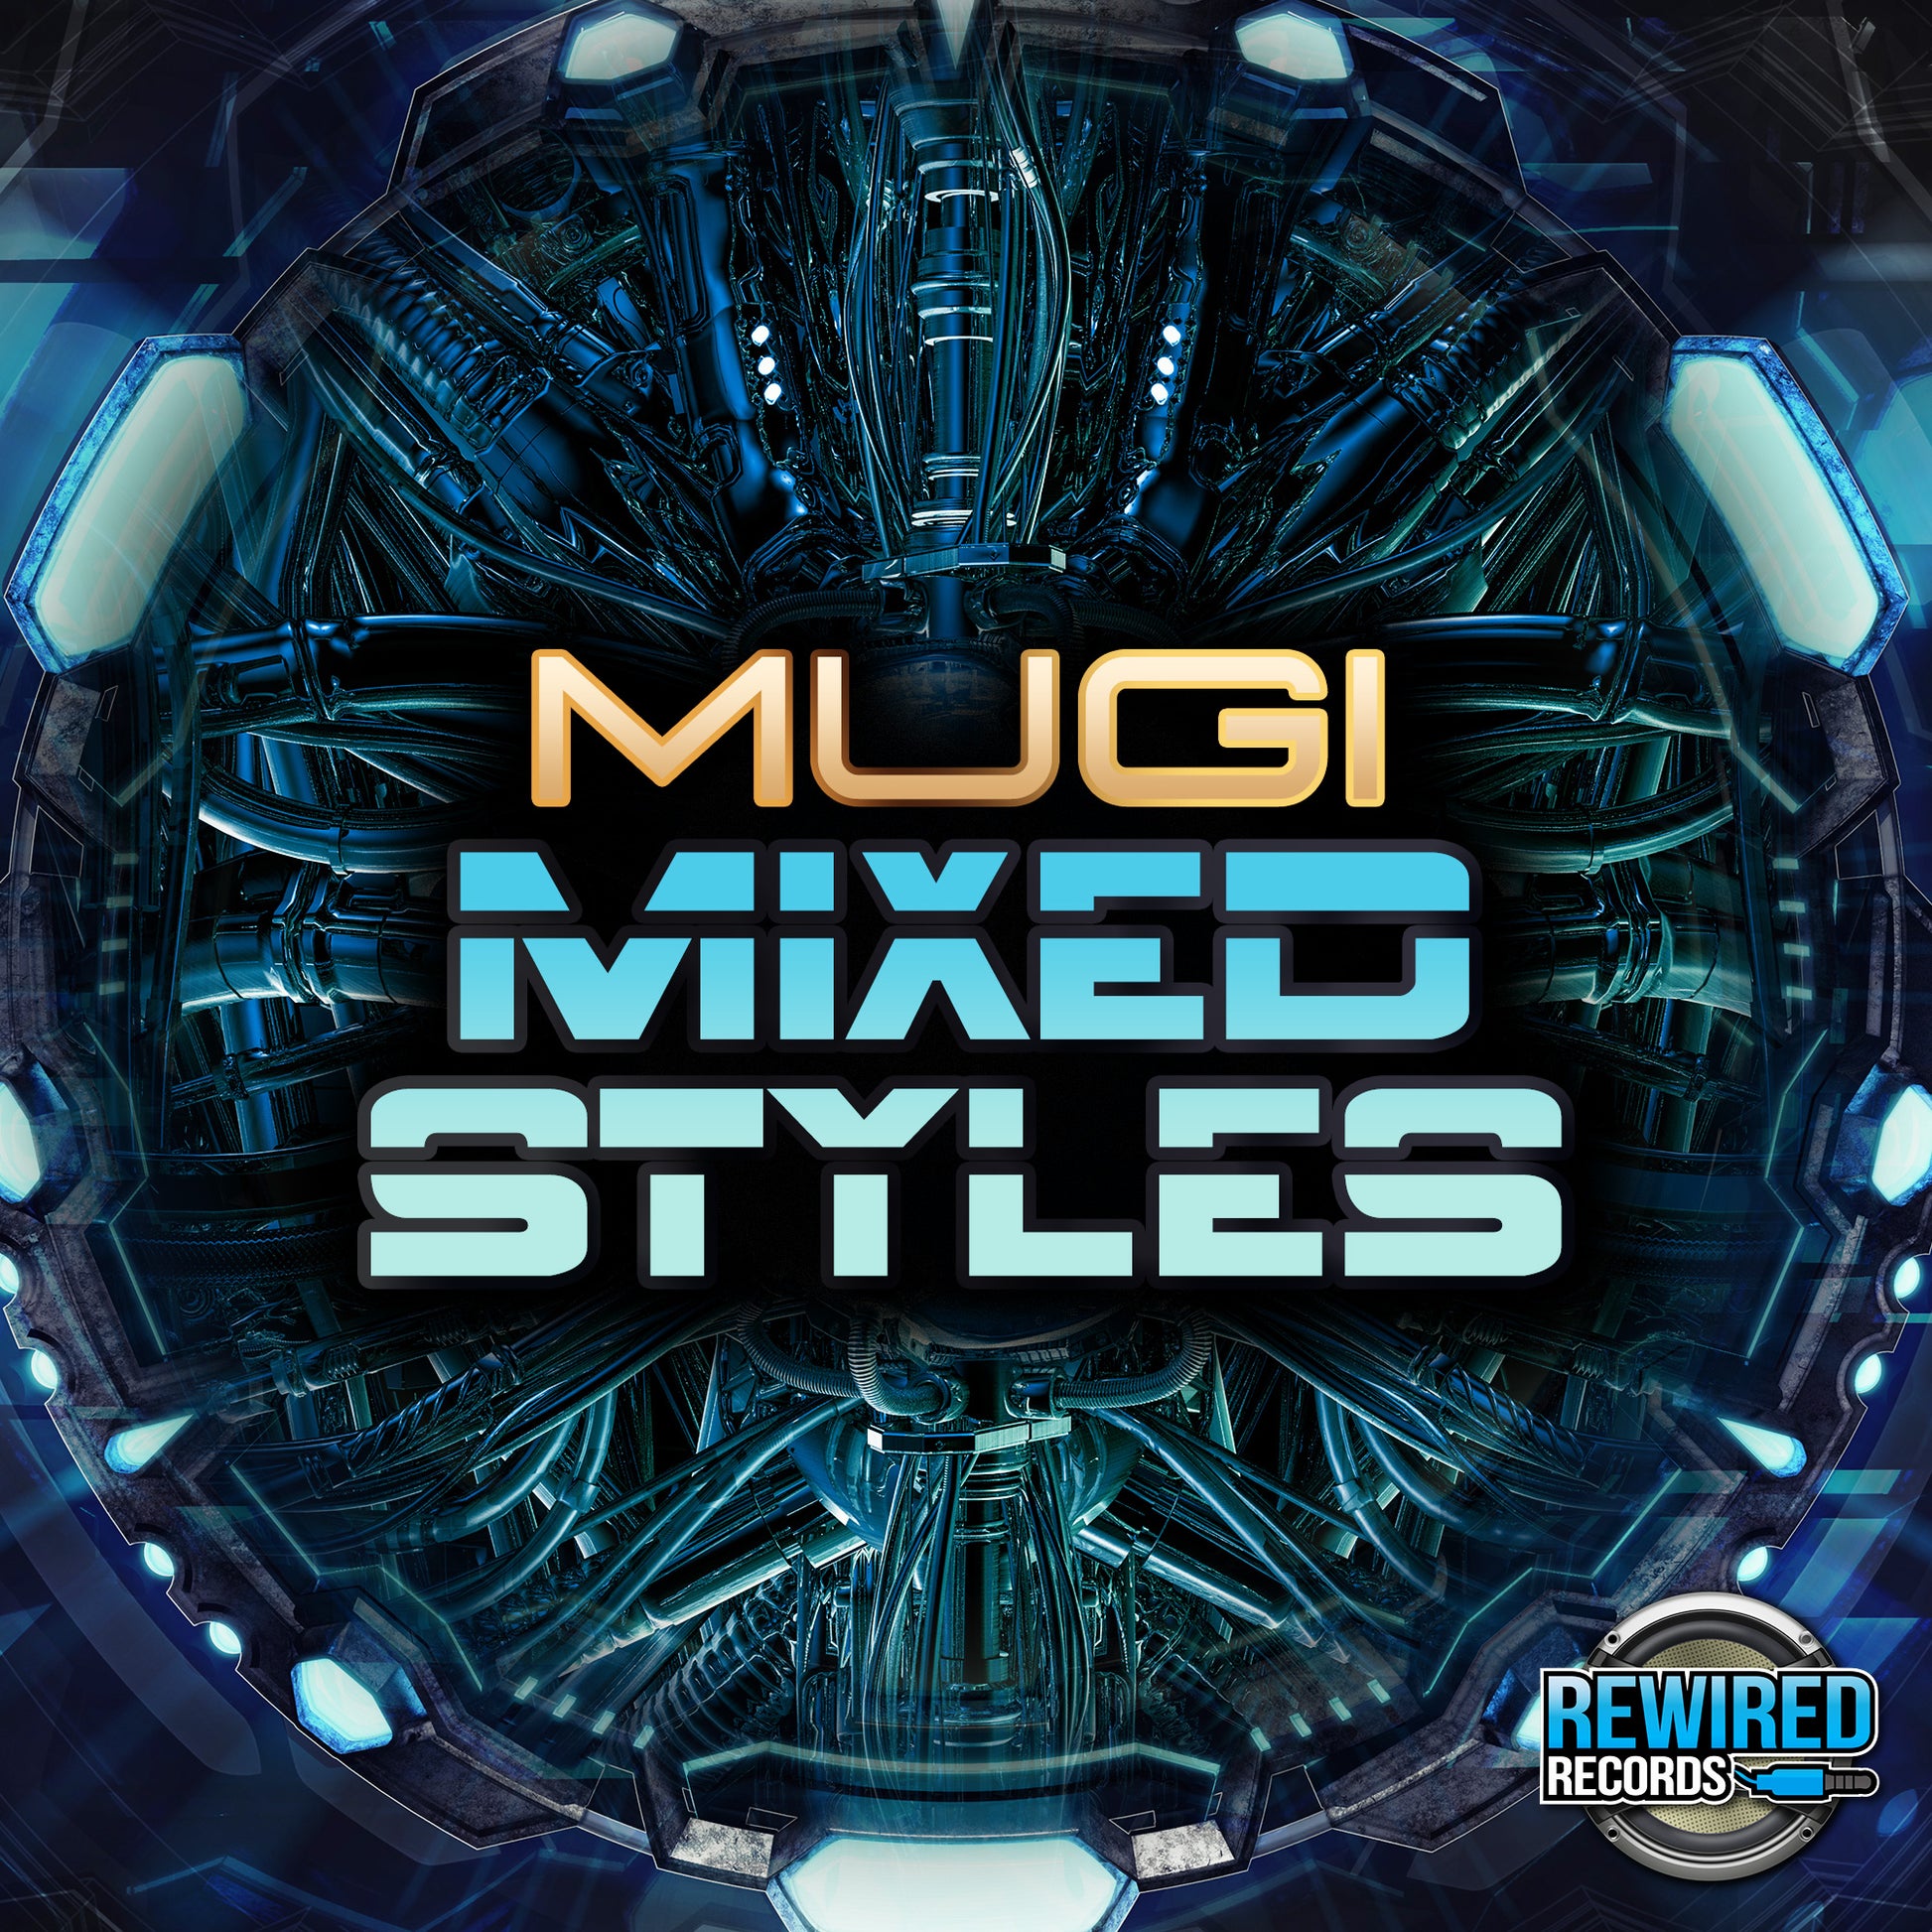 Mugi - Mixed Styles - Rewired Records